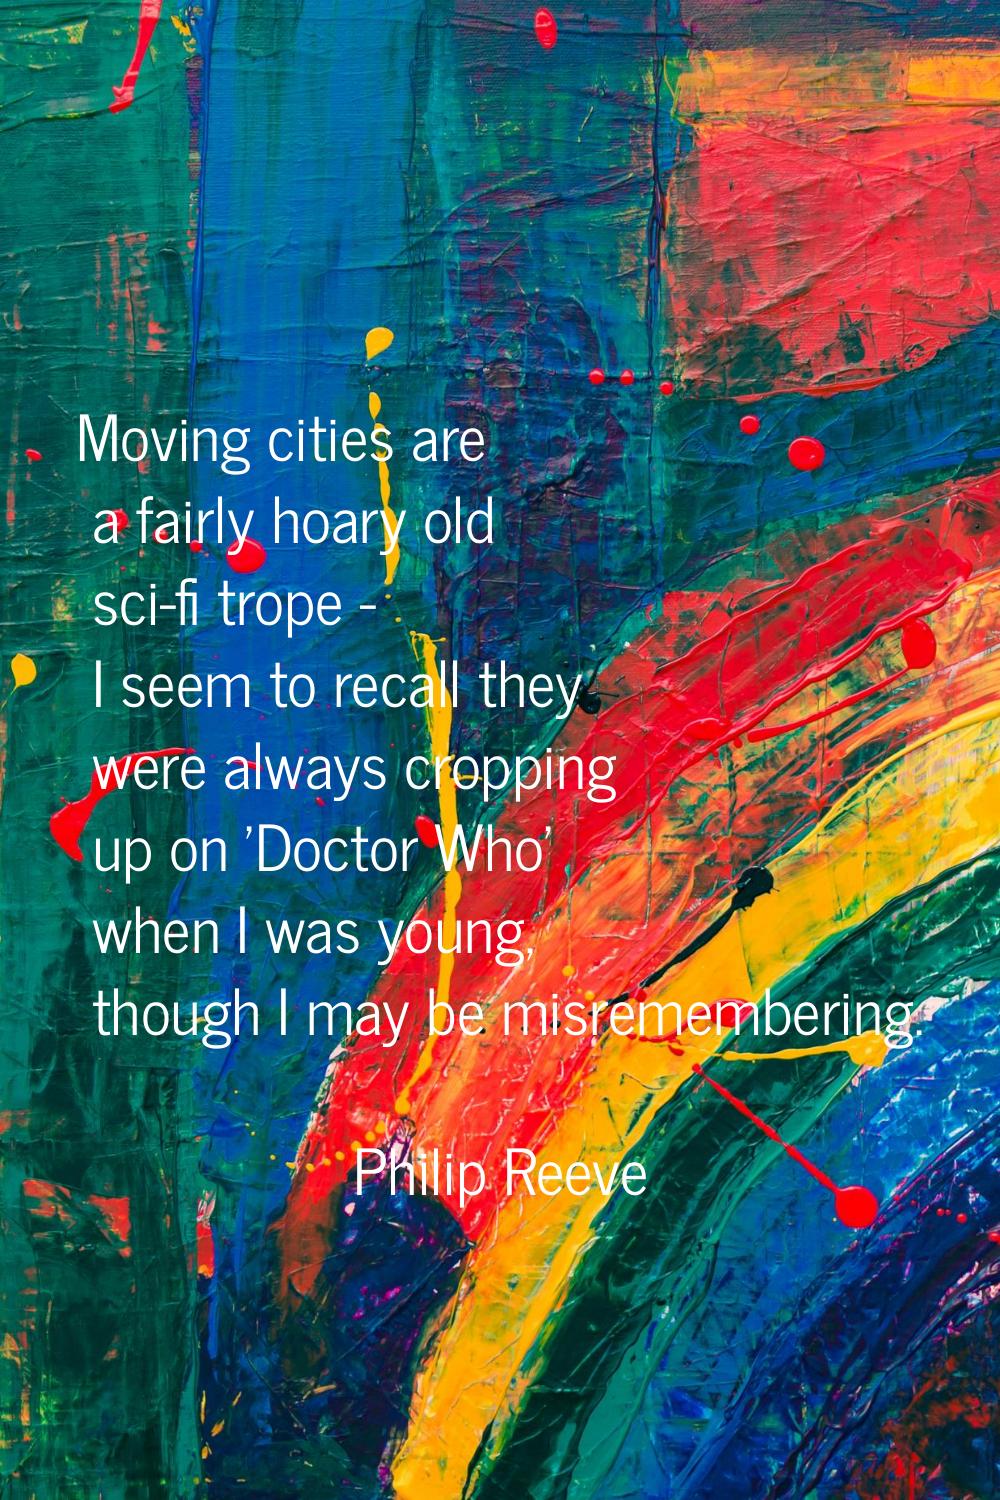 Moving cities are a fairly hoary old sci-fi trope - I seem to recall they were always cropping up o